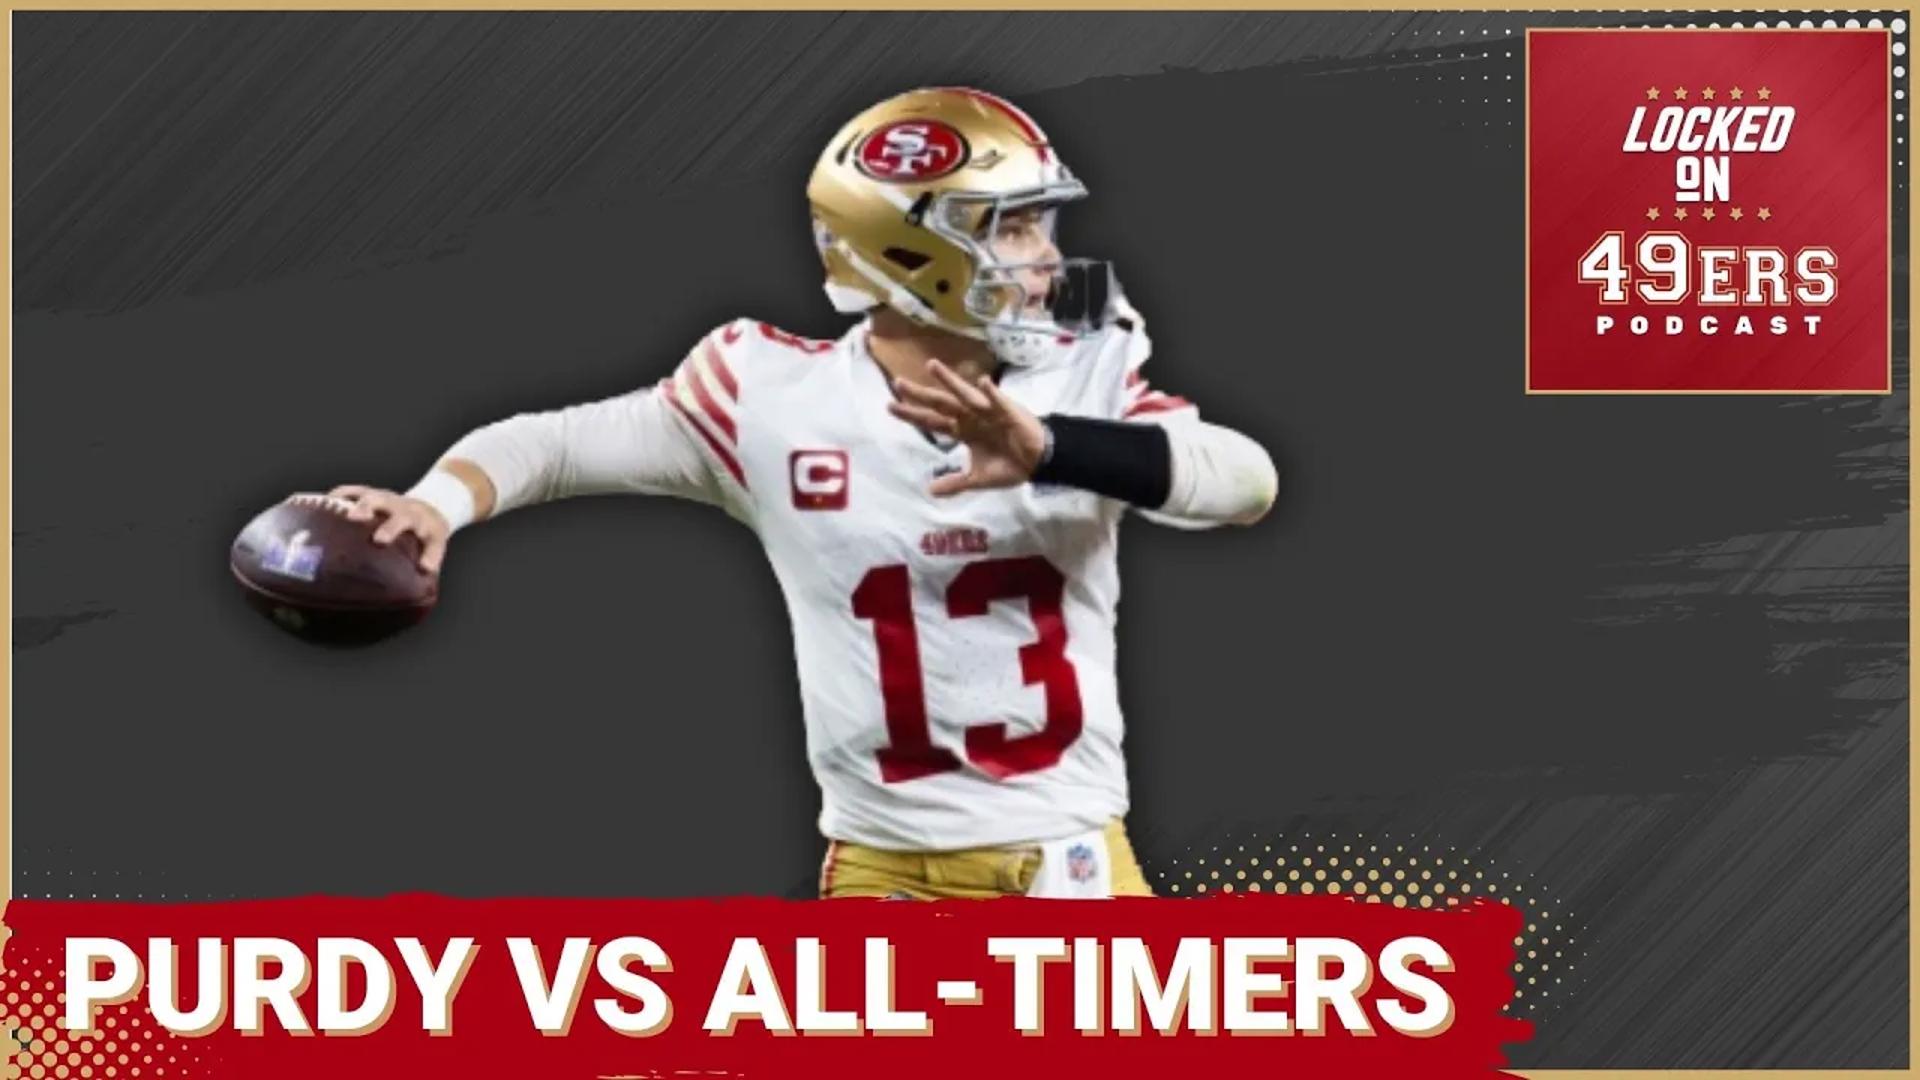 Joe Montana and Steve Young hoisted Lombardi trophies, John Brodie and YA Tittle were among the best in the game during their careers, where does Brock Purdy rank?